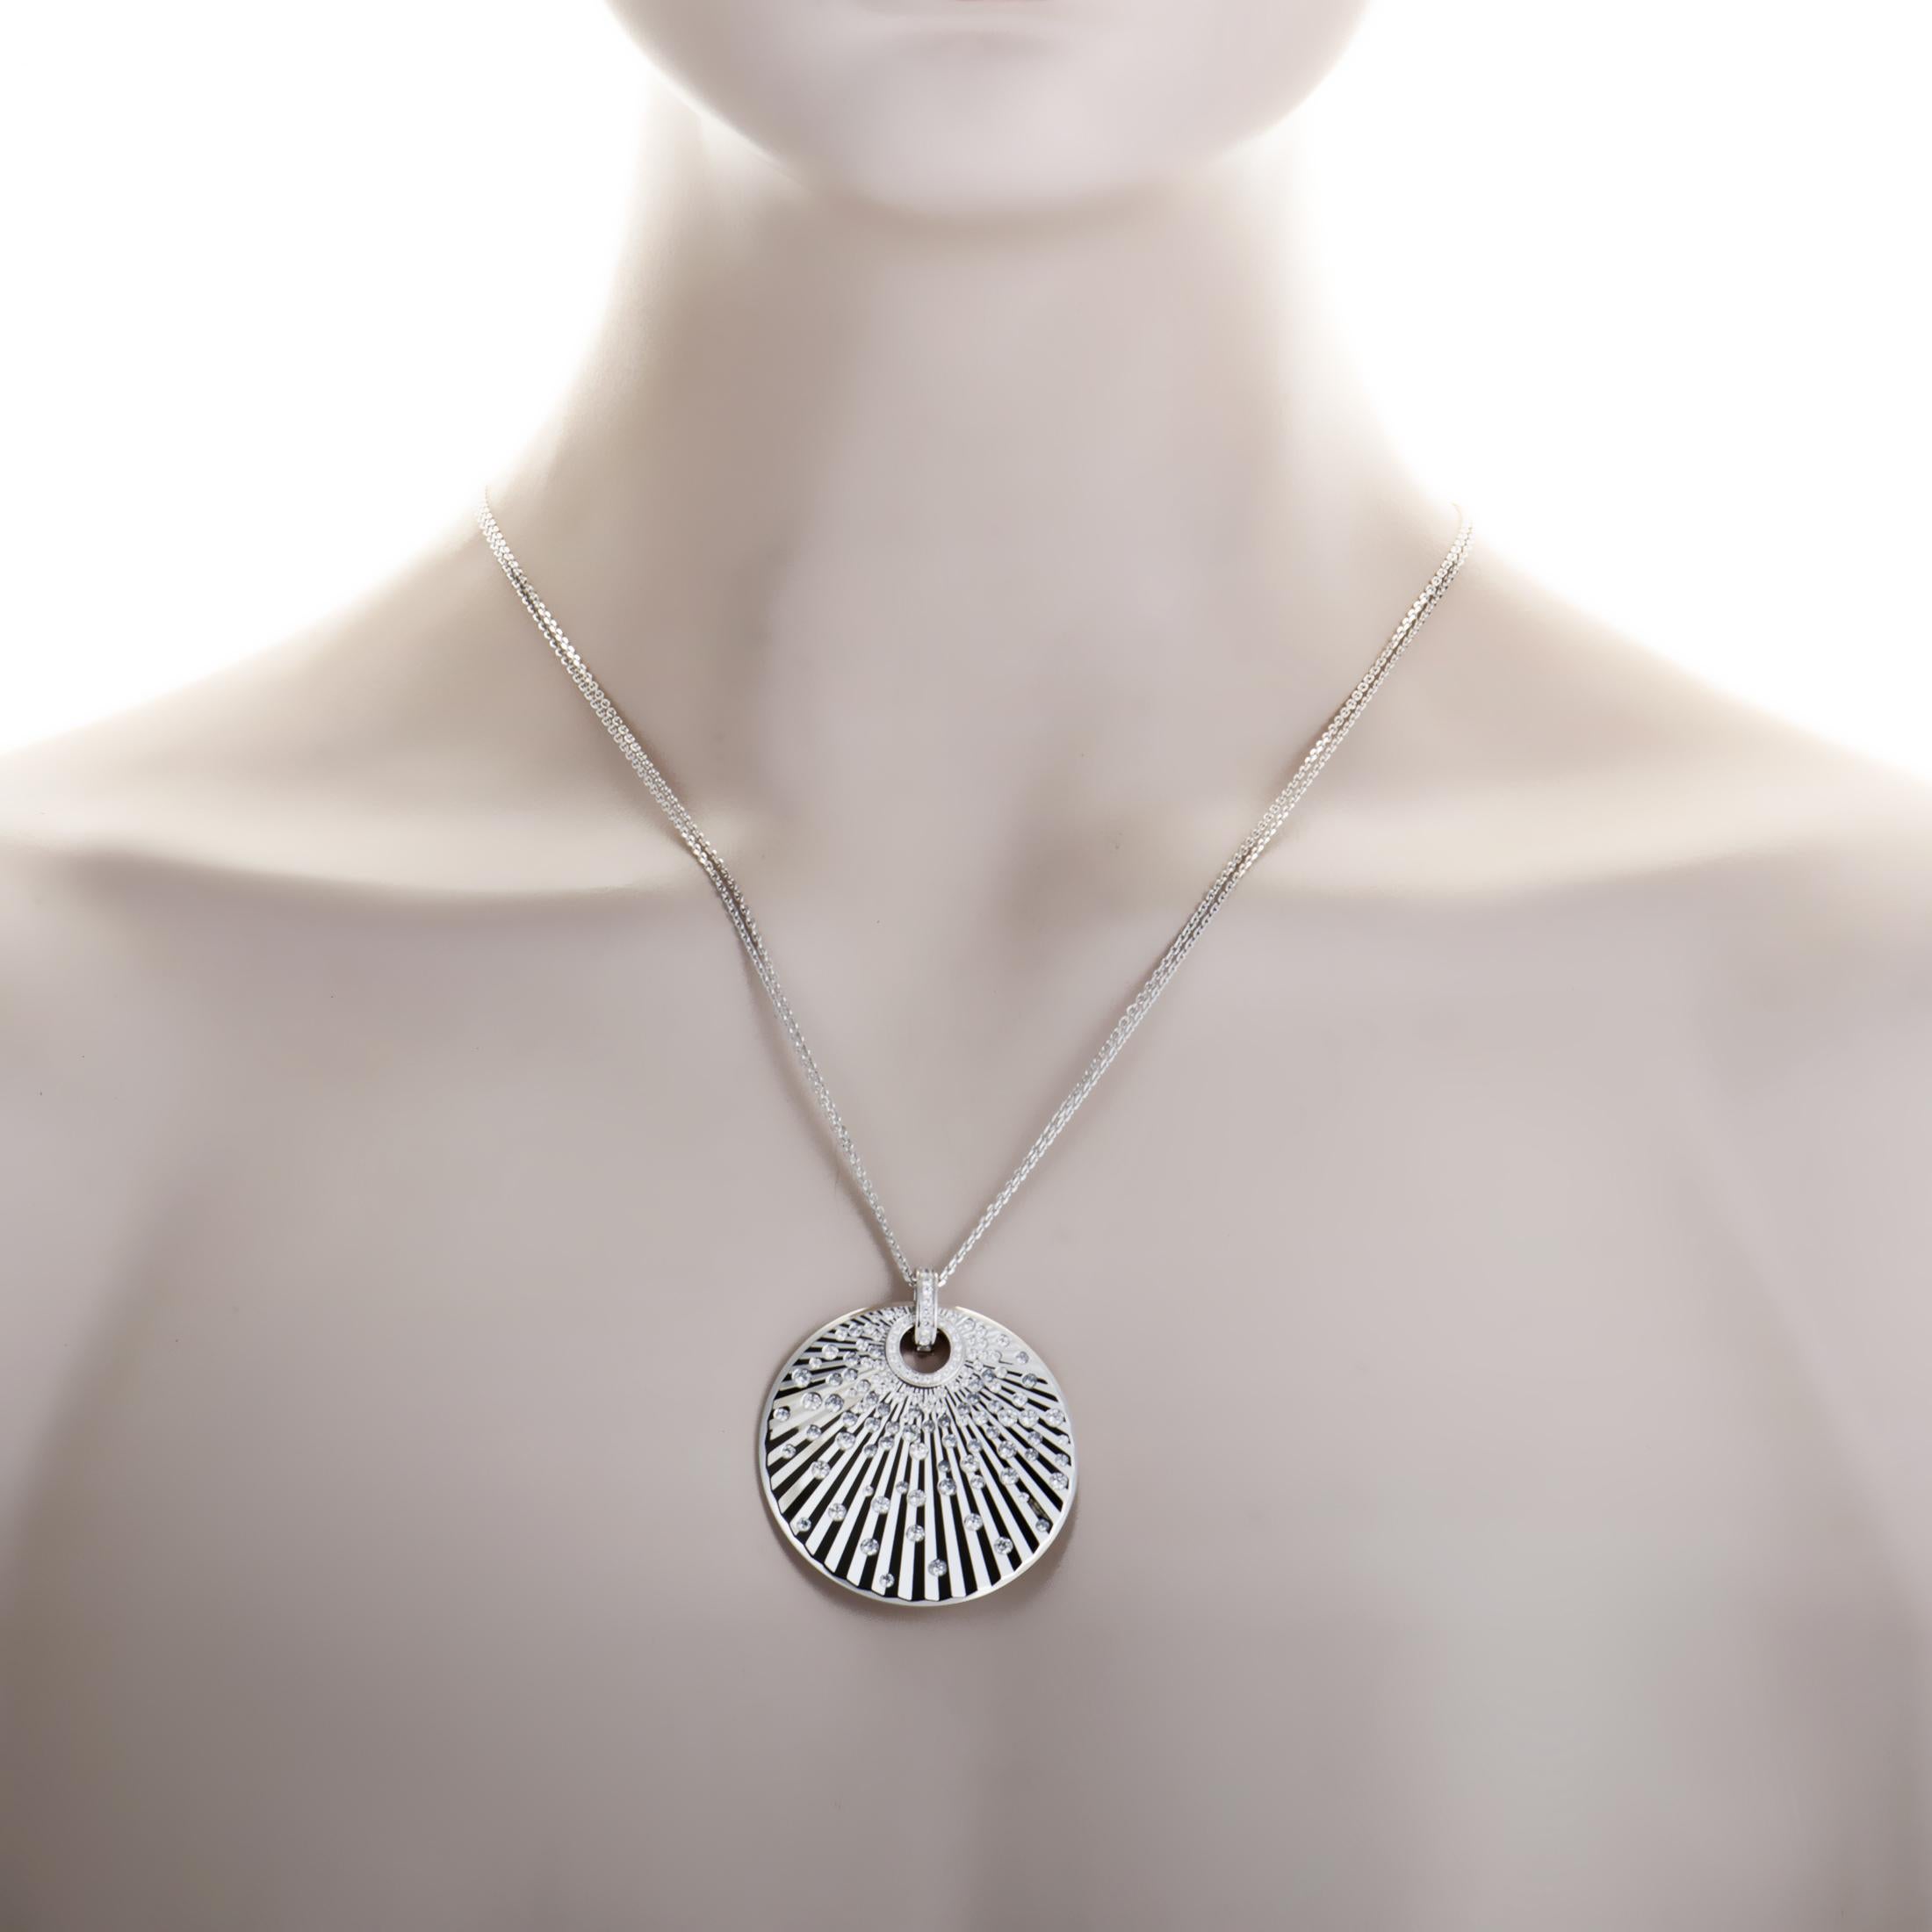 Producing an exceptionally mesmerizing allure with its intricately ornamented 18K white gold and fascinating arrangement of sparkling diamonds weighing in total 3.07 carats, the astonishing pendant of this fantastic necklace from Chopard is a